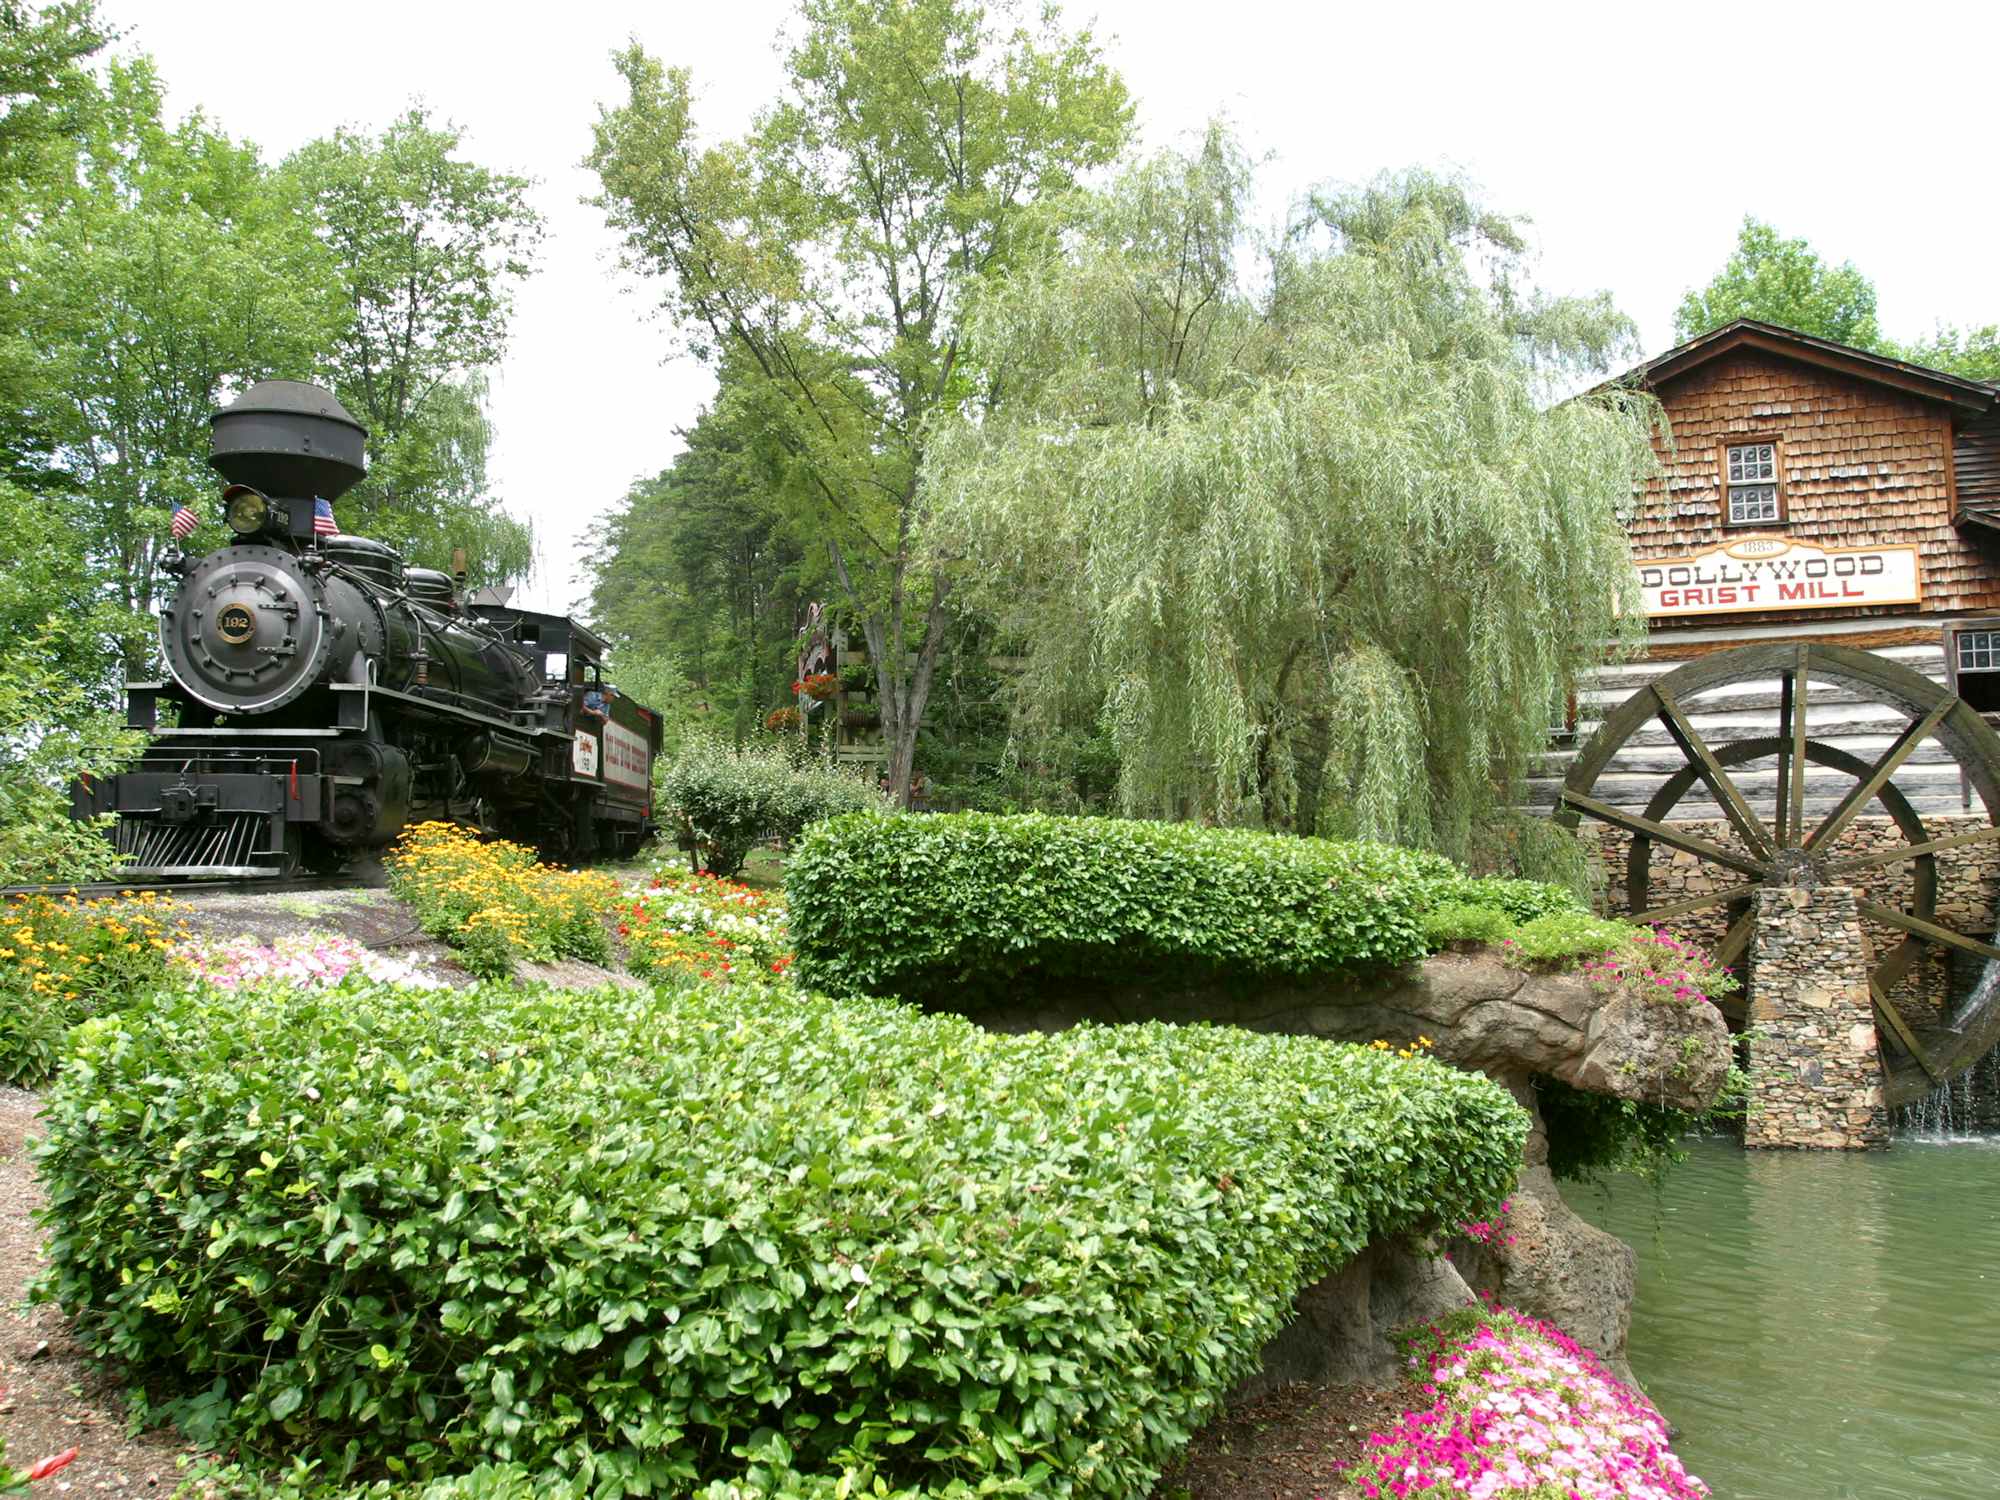 dollywood train and grist mill in gatlinburg tennessee